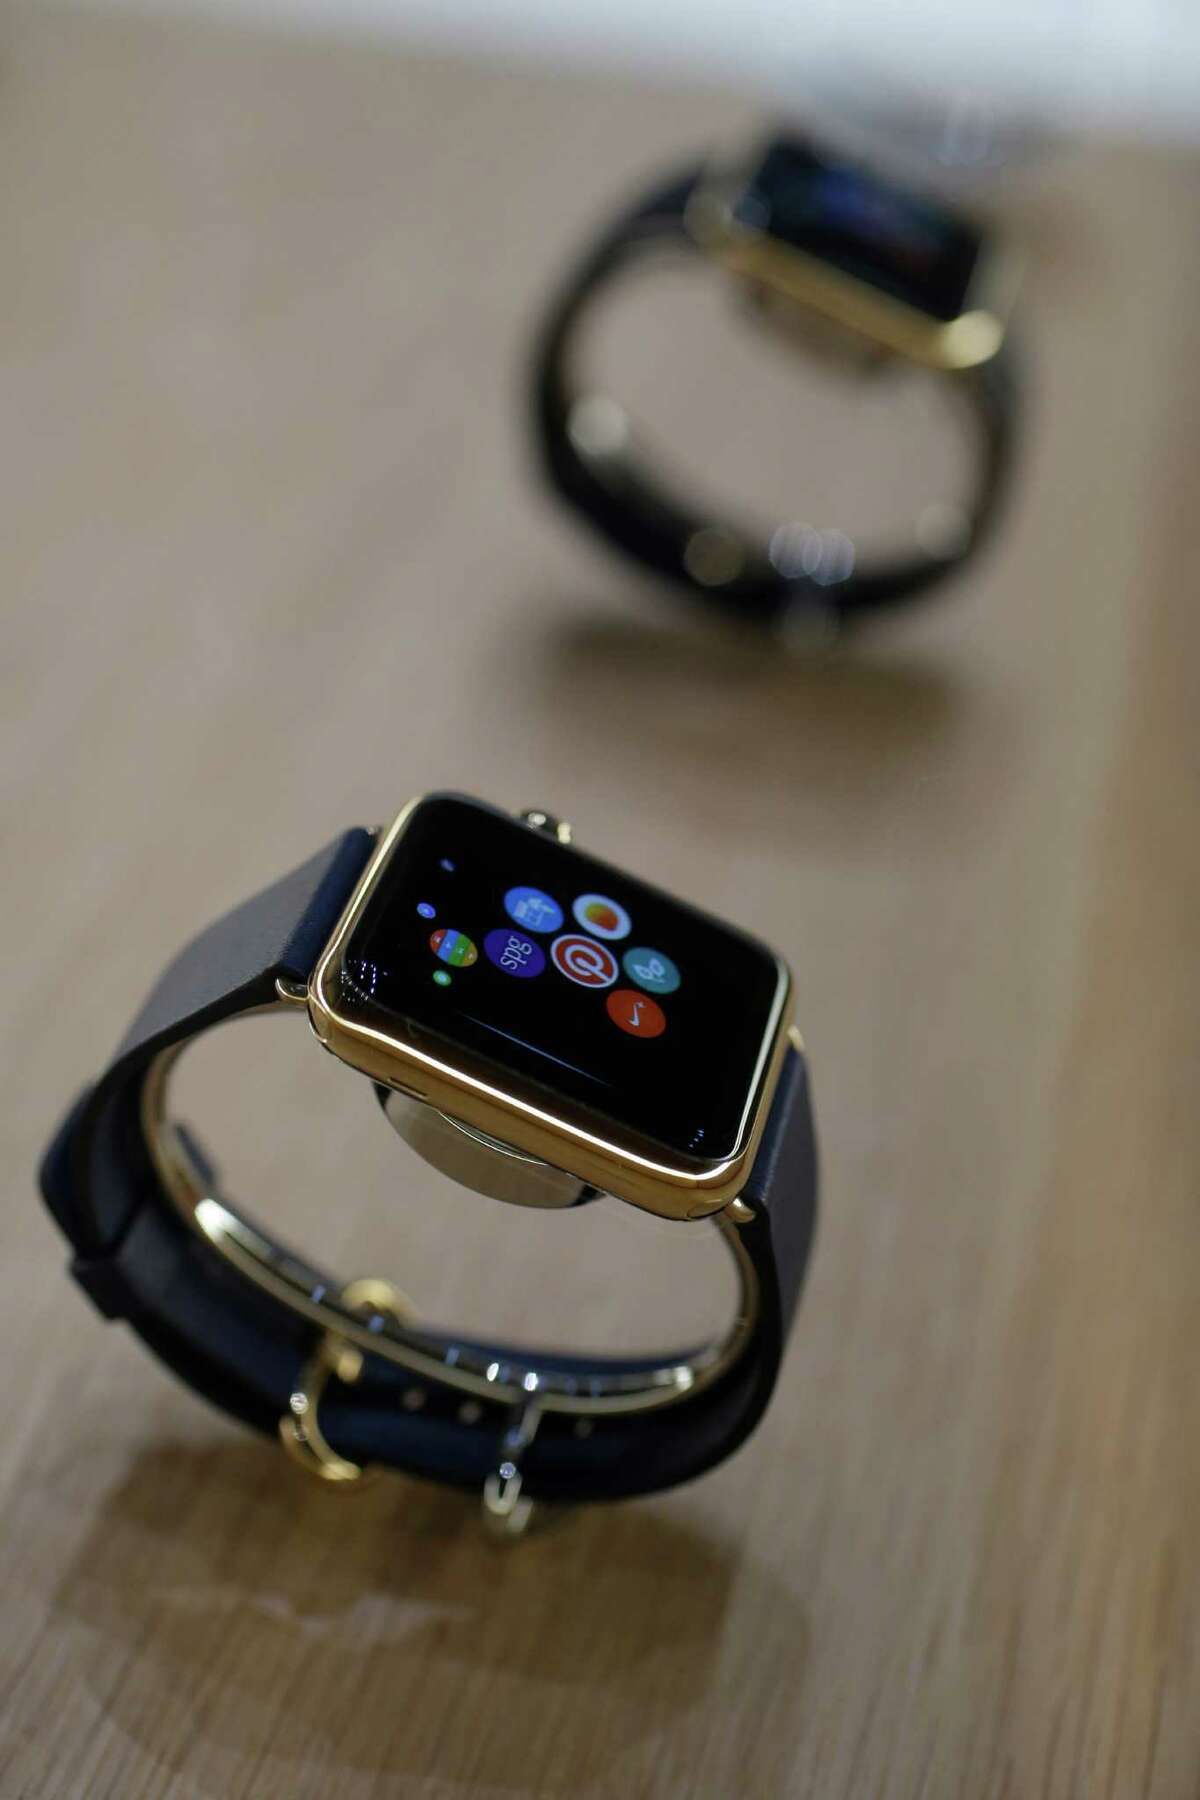 The Apple Watch is displayed on Tuesday, Sept. 9, 2014, in Cupertino, Calif.AP Review: Apple Watch looks to be another winner